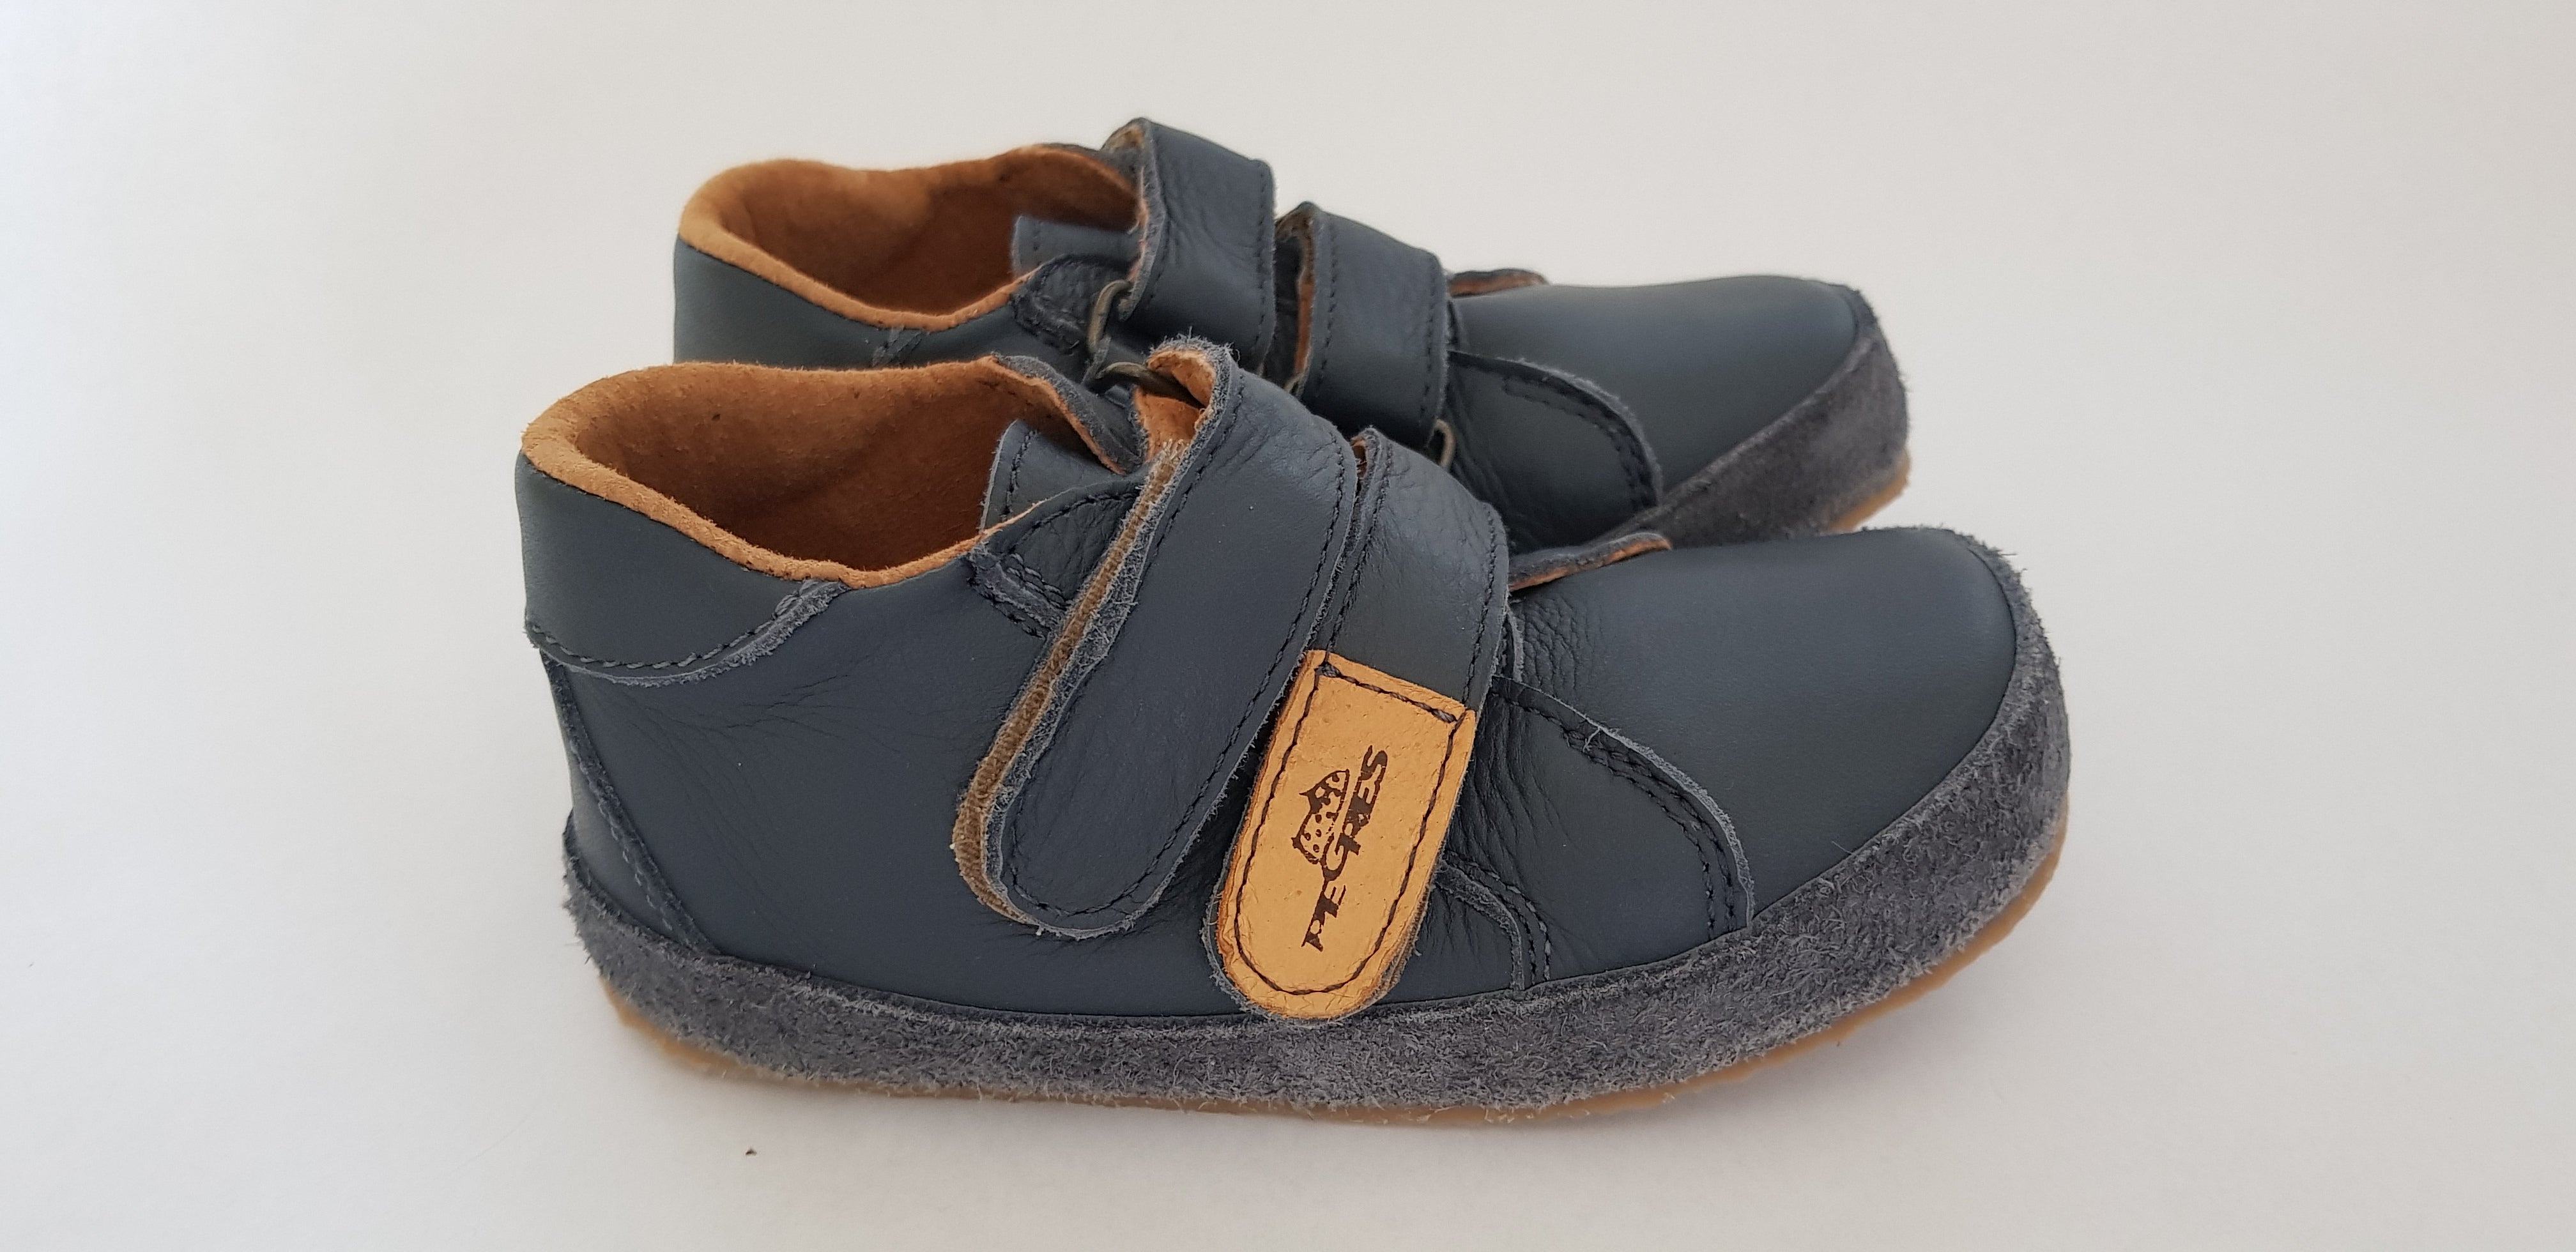 Barefoot-Friendly Blue Soft Leather Shoes for Children